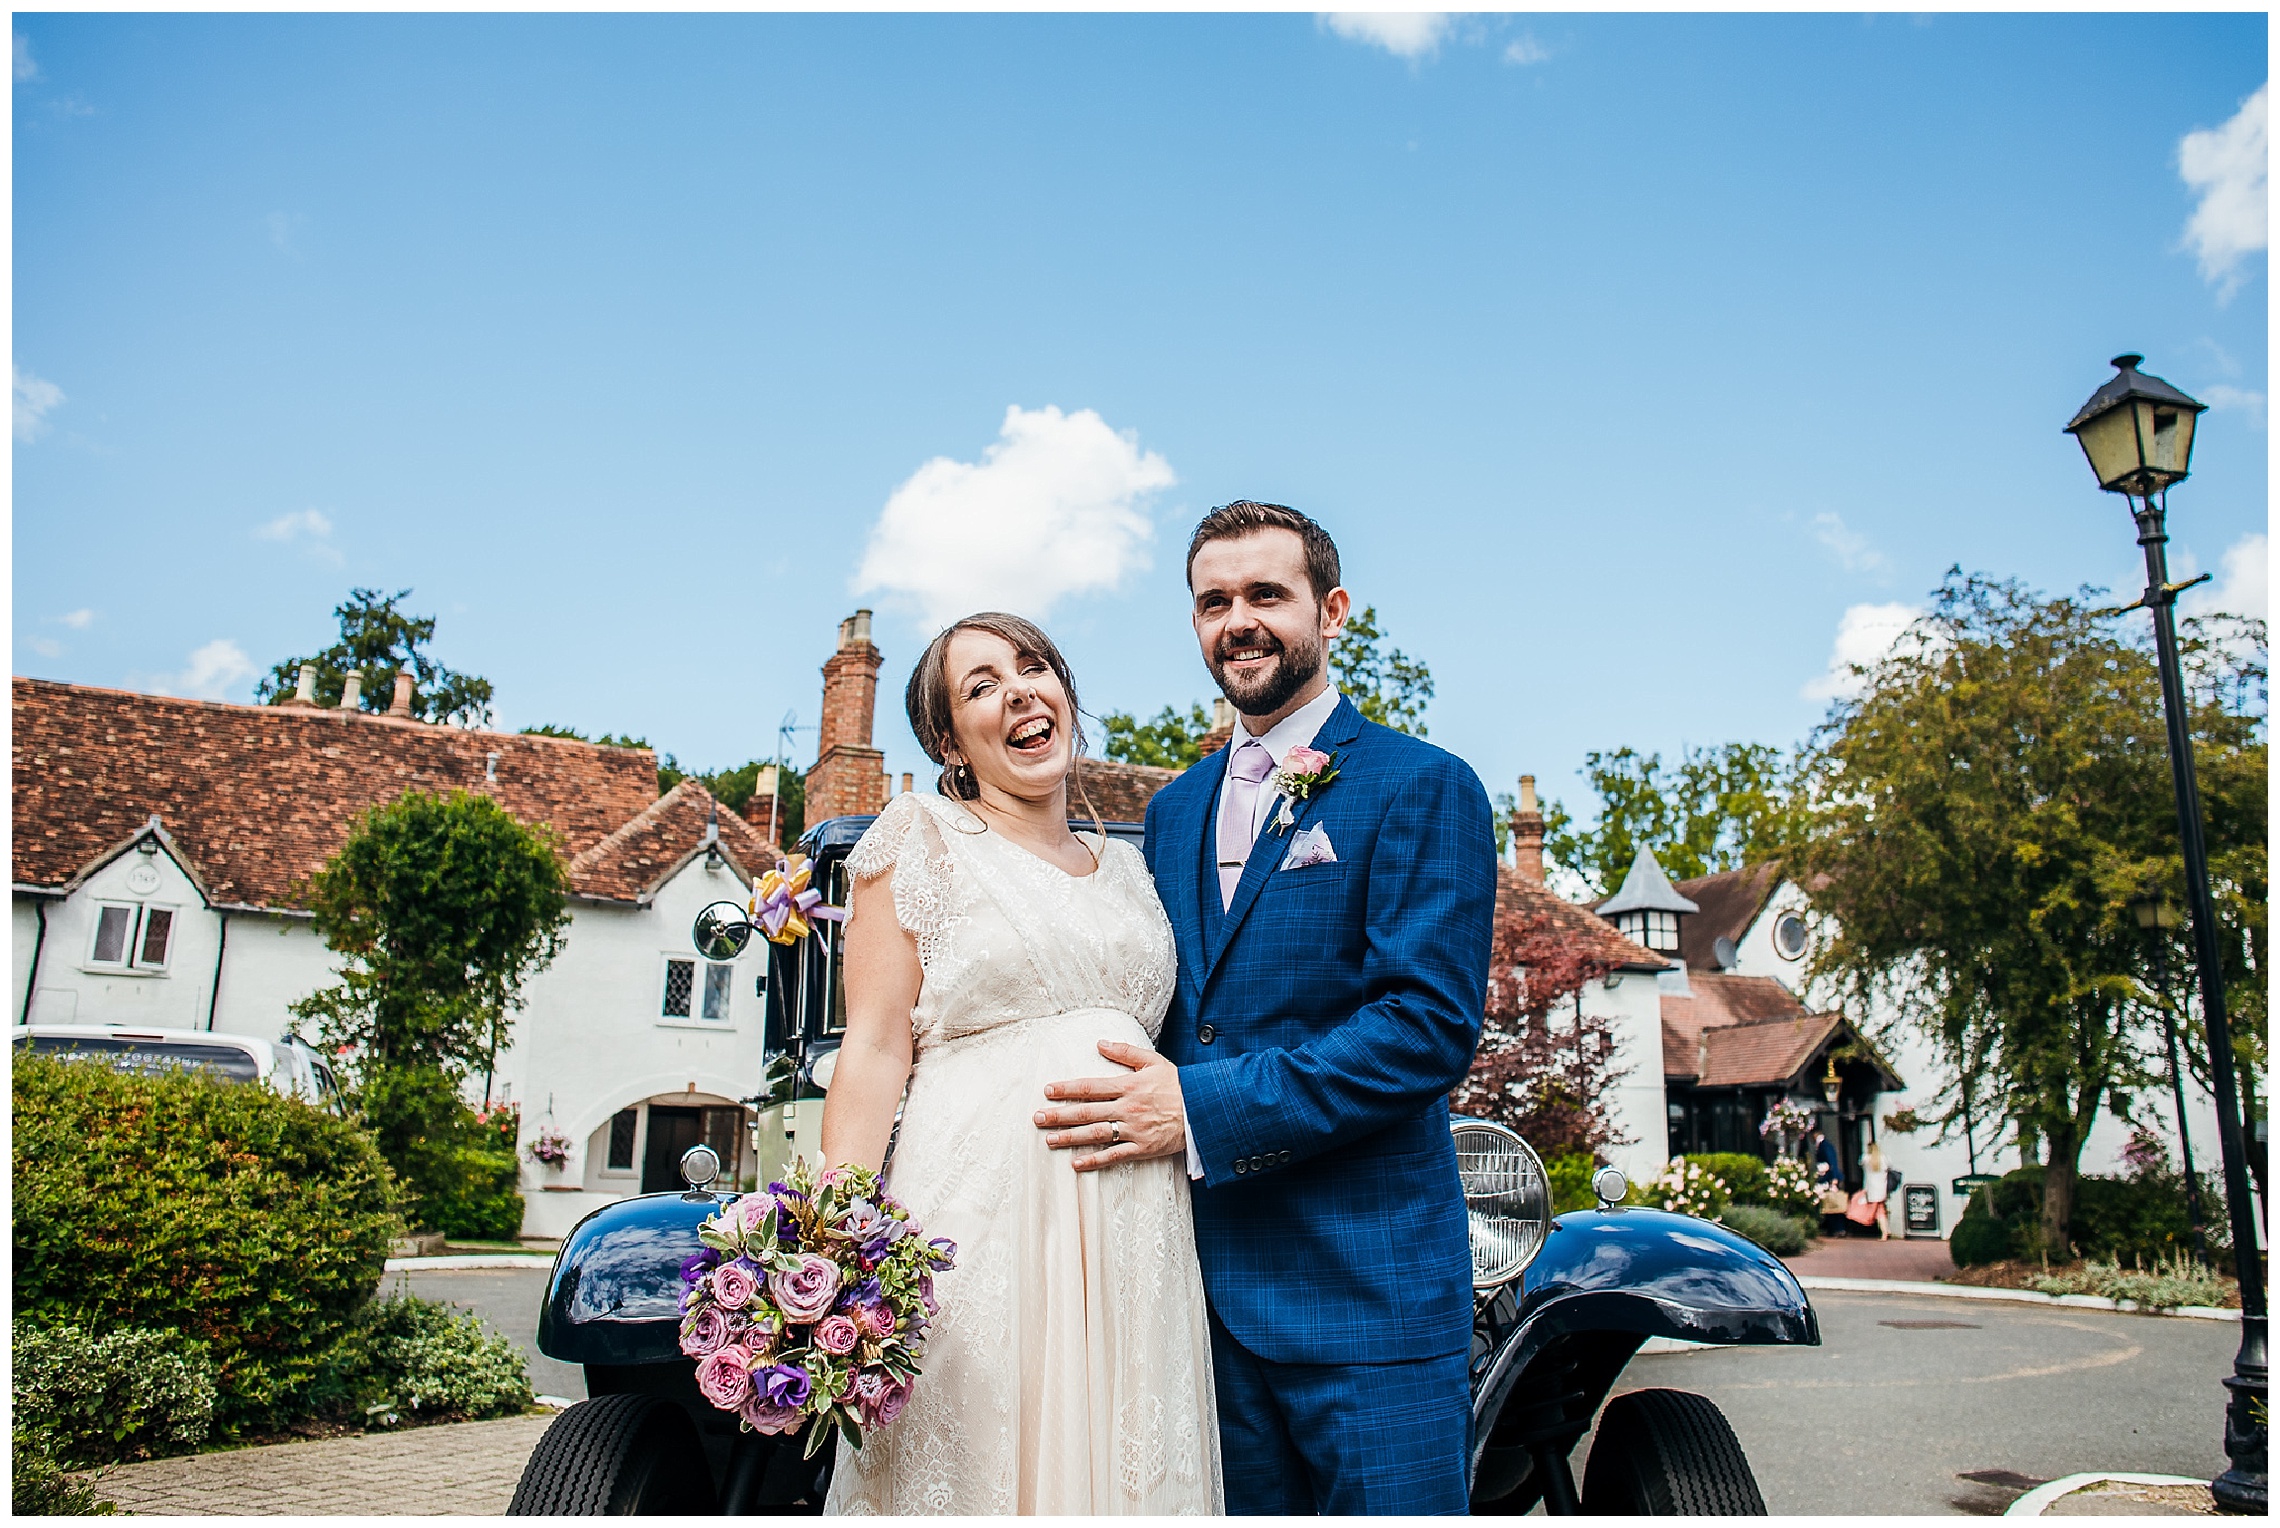 bride and groom laugh together in front of vintage wedding car and barns hotel in Bedfordshire d